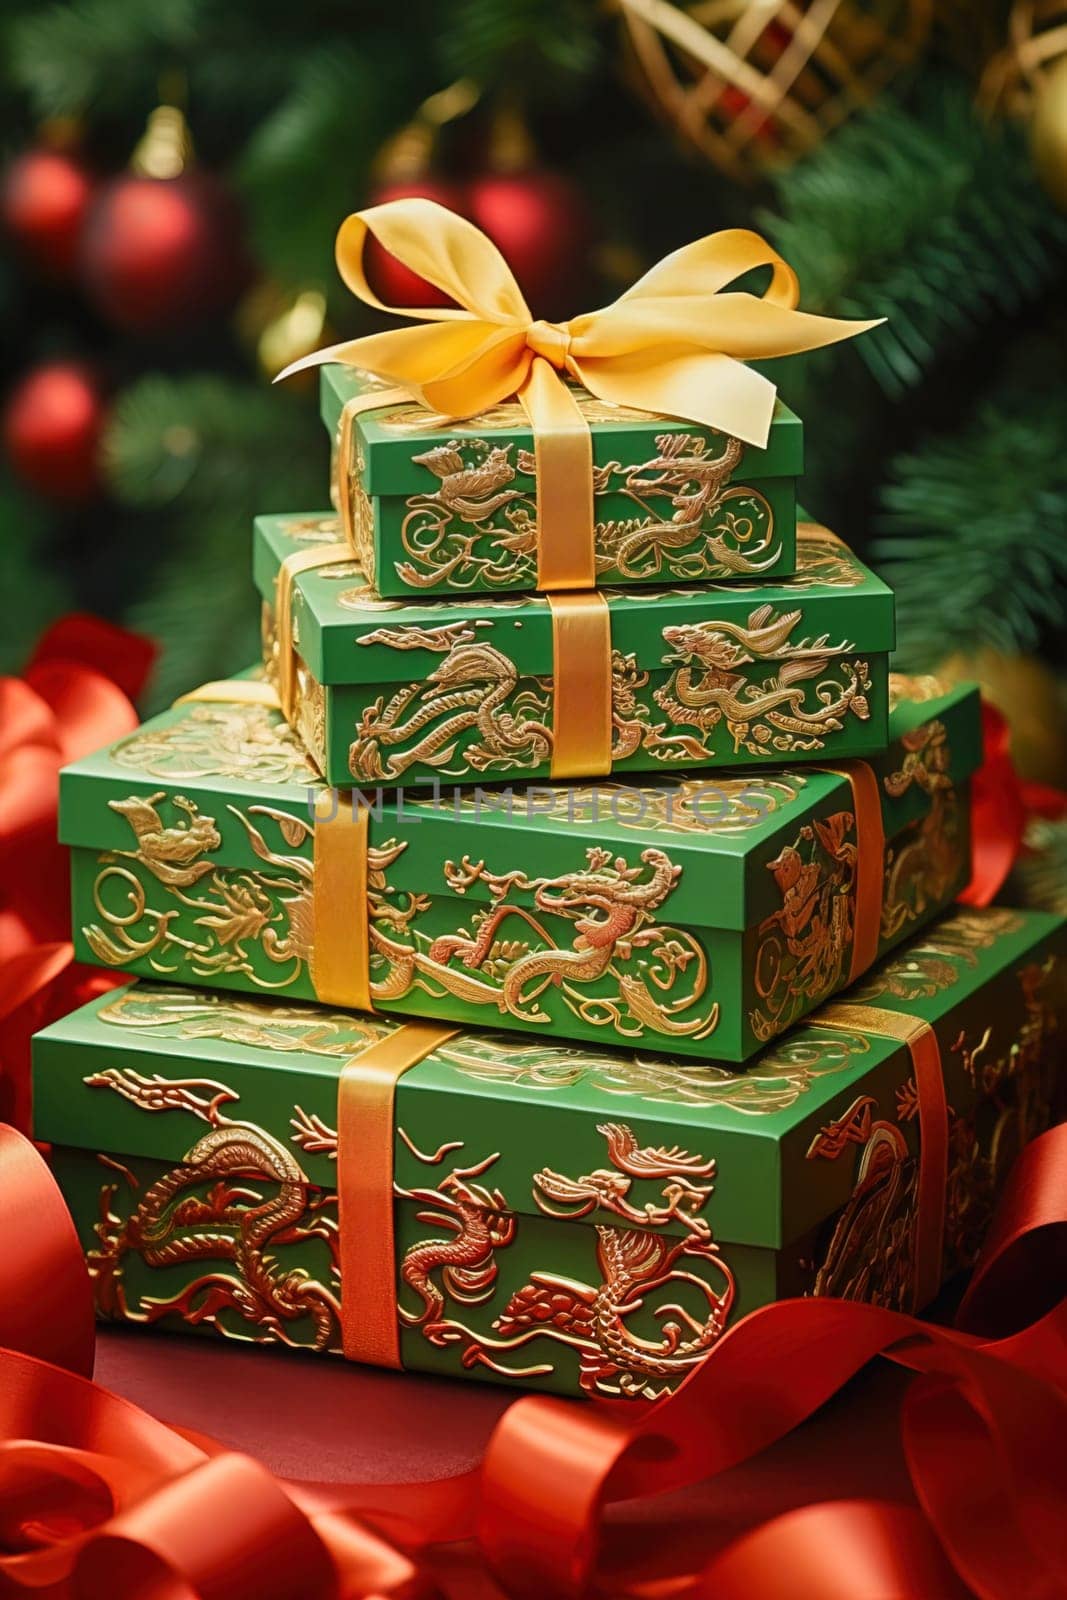 Green gift box with a dragon image. by Yurich32